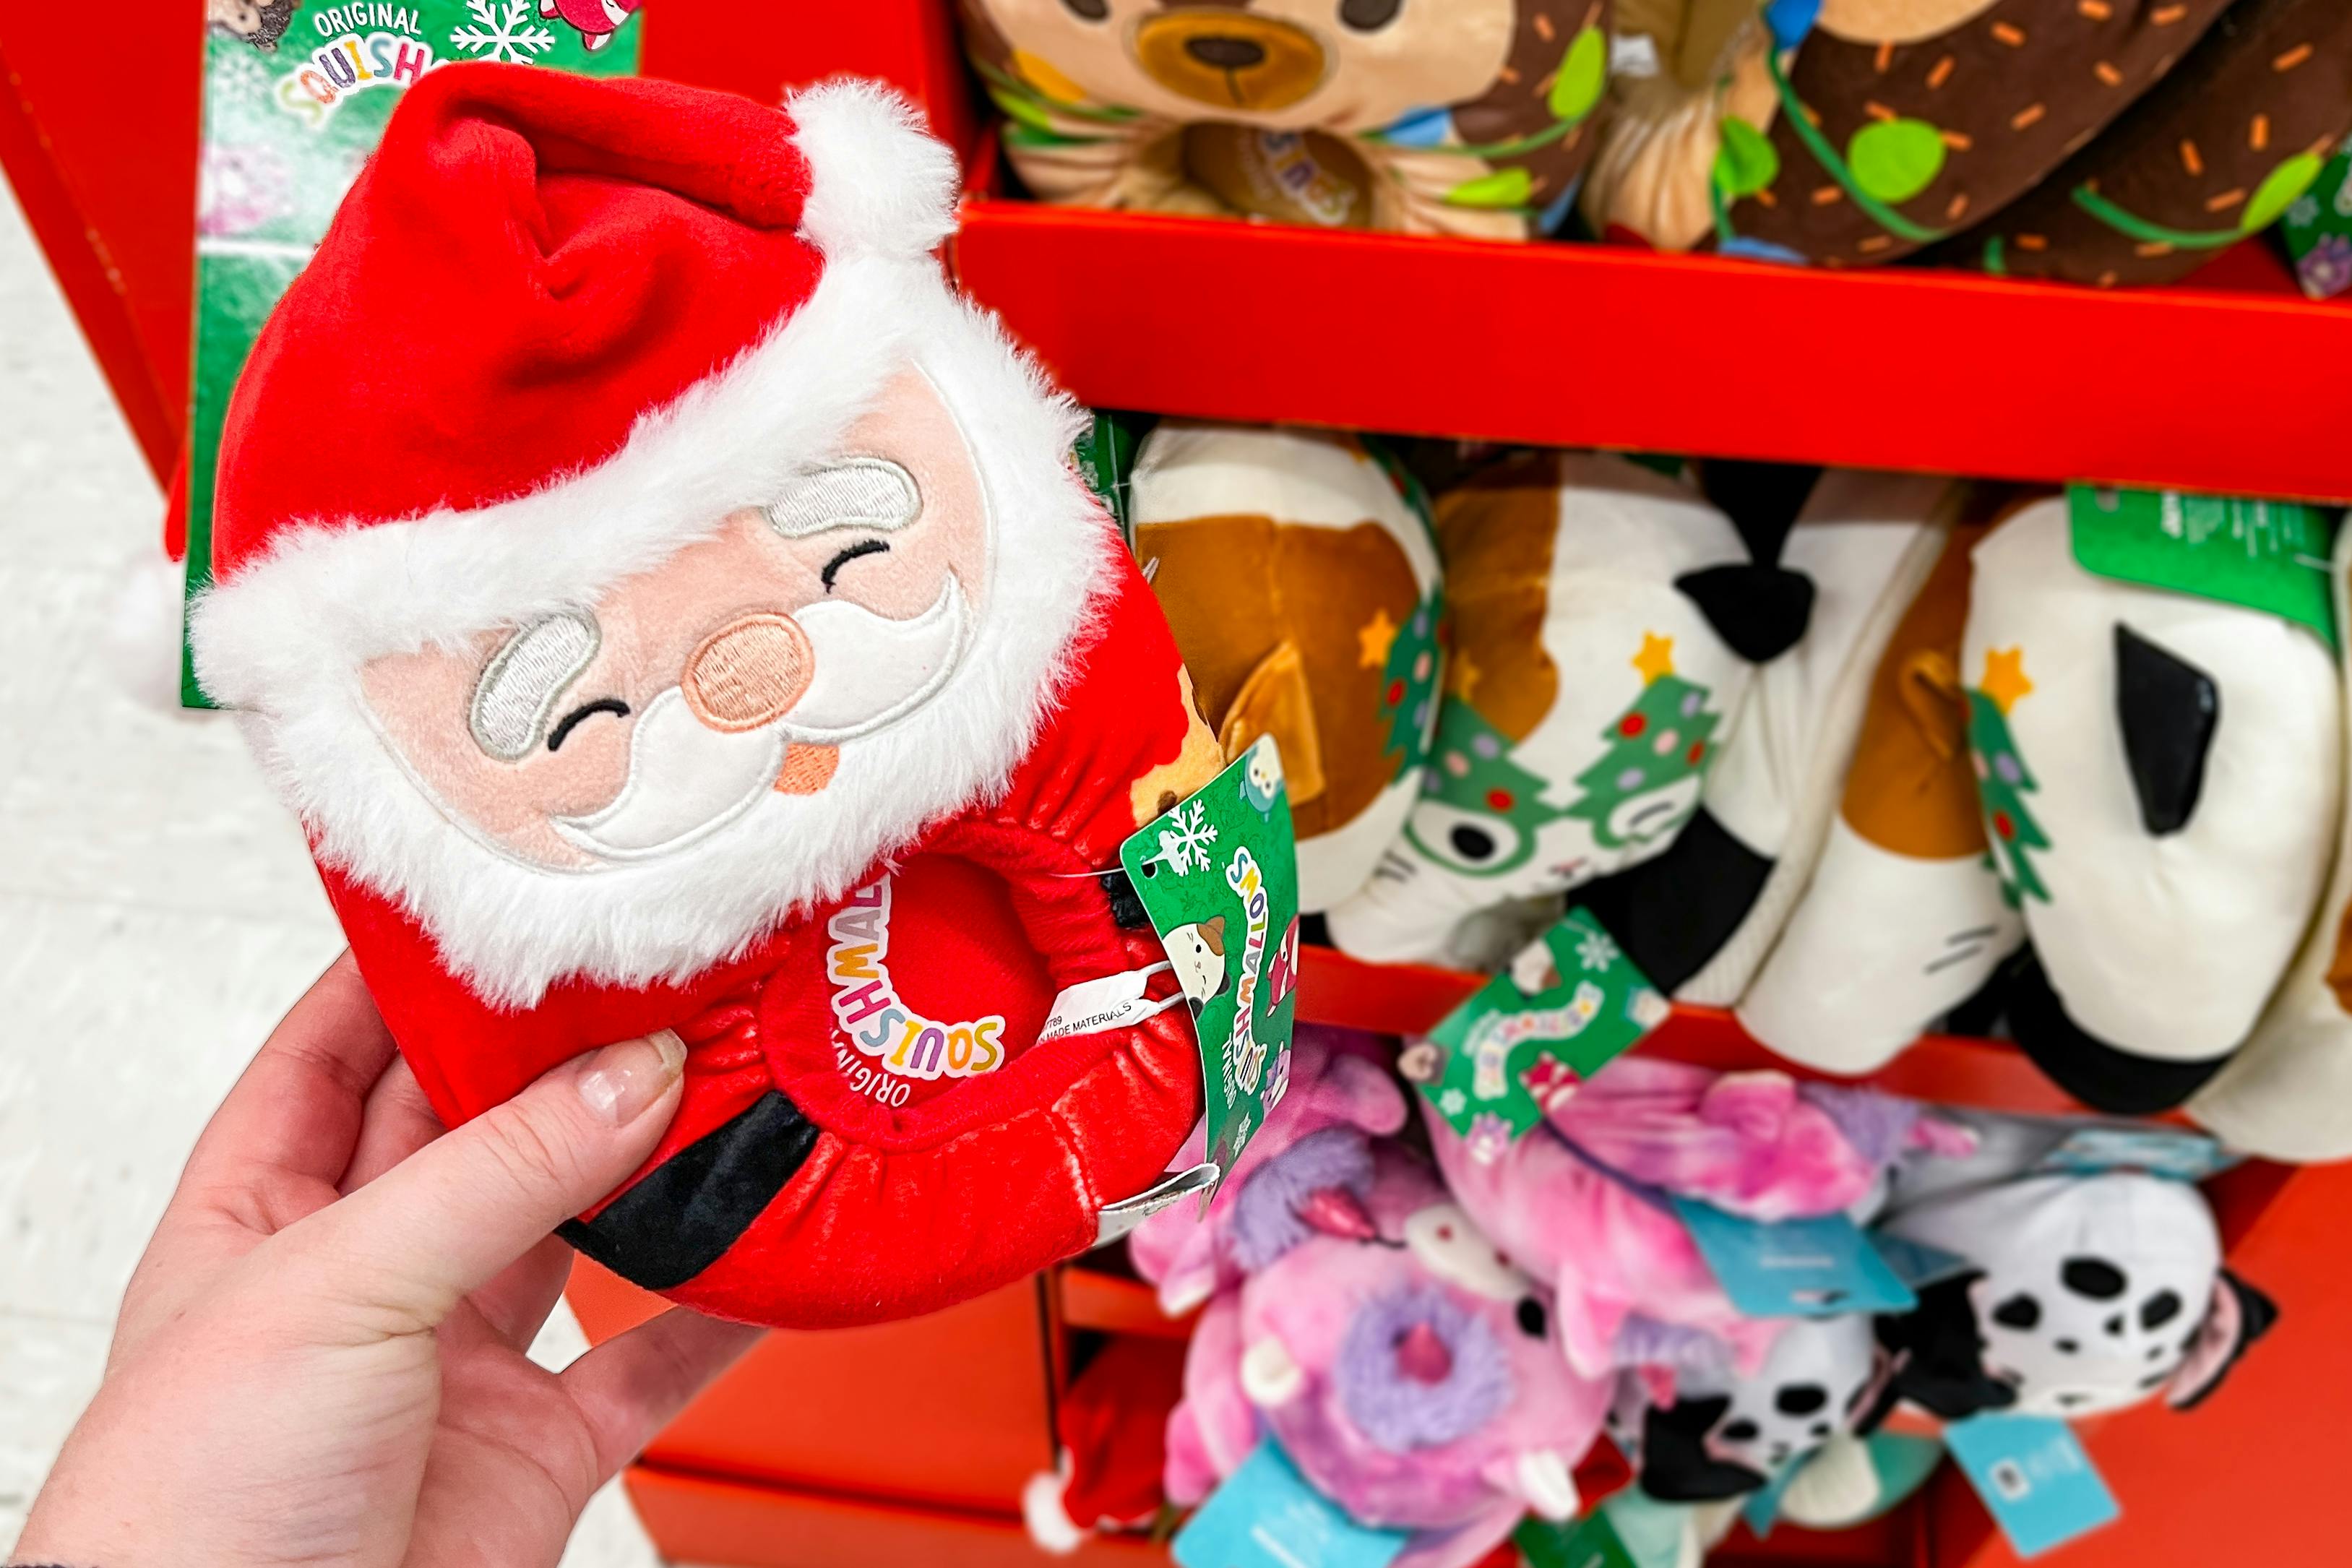 Squishmallows Ornaments 8-Pack Just $12.99 at Costco